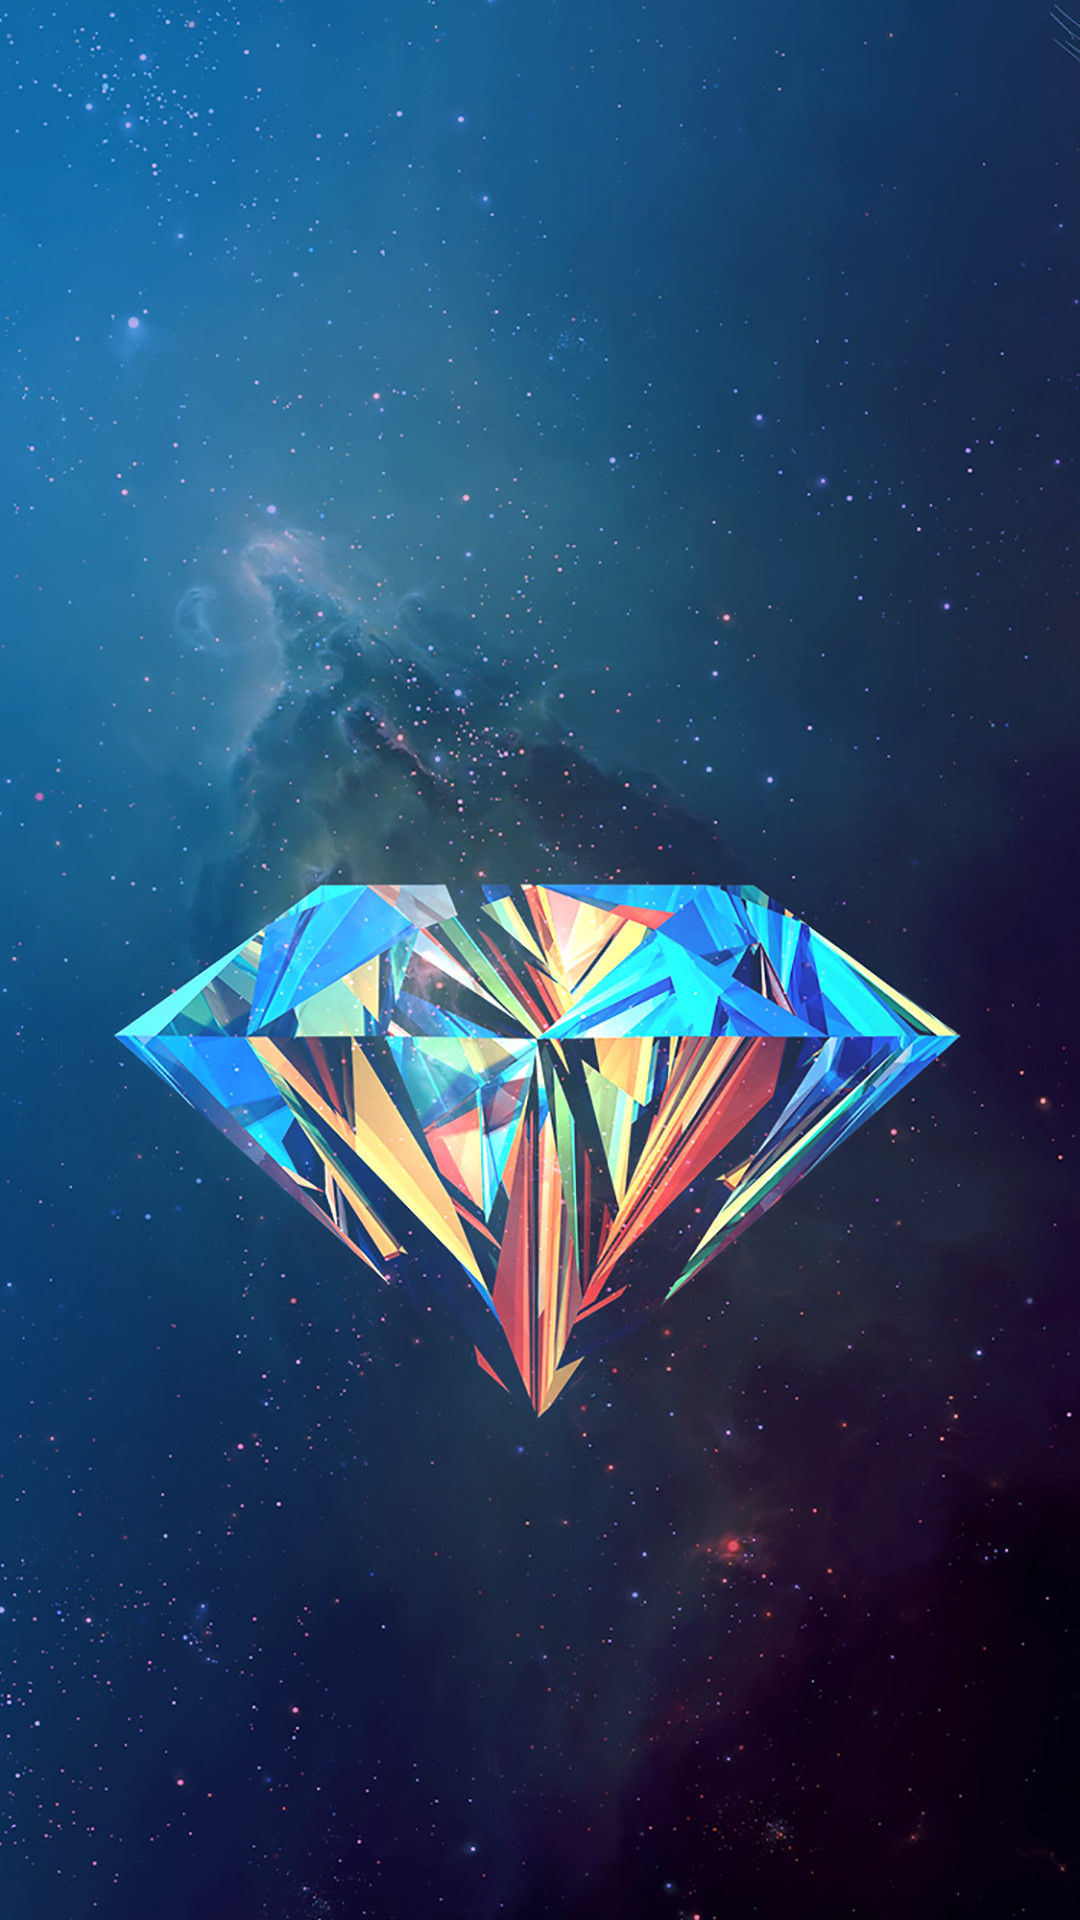 1080x1920 Search Results for “diamond iphone 6 wallpaper” – Adorable Wallpapers